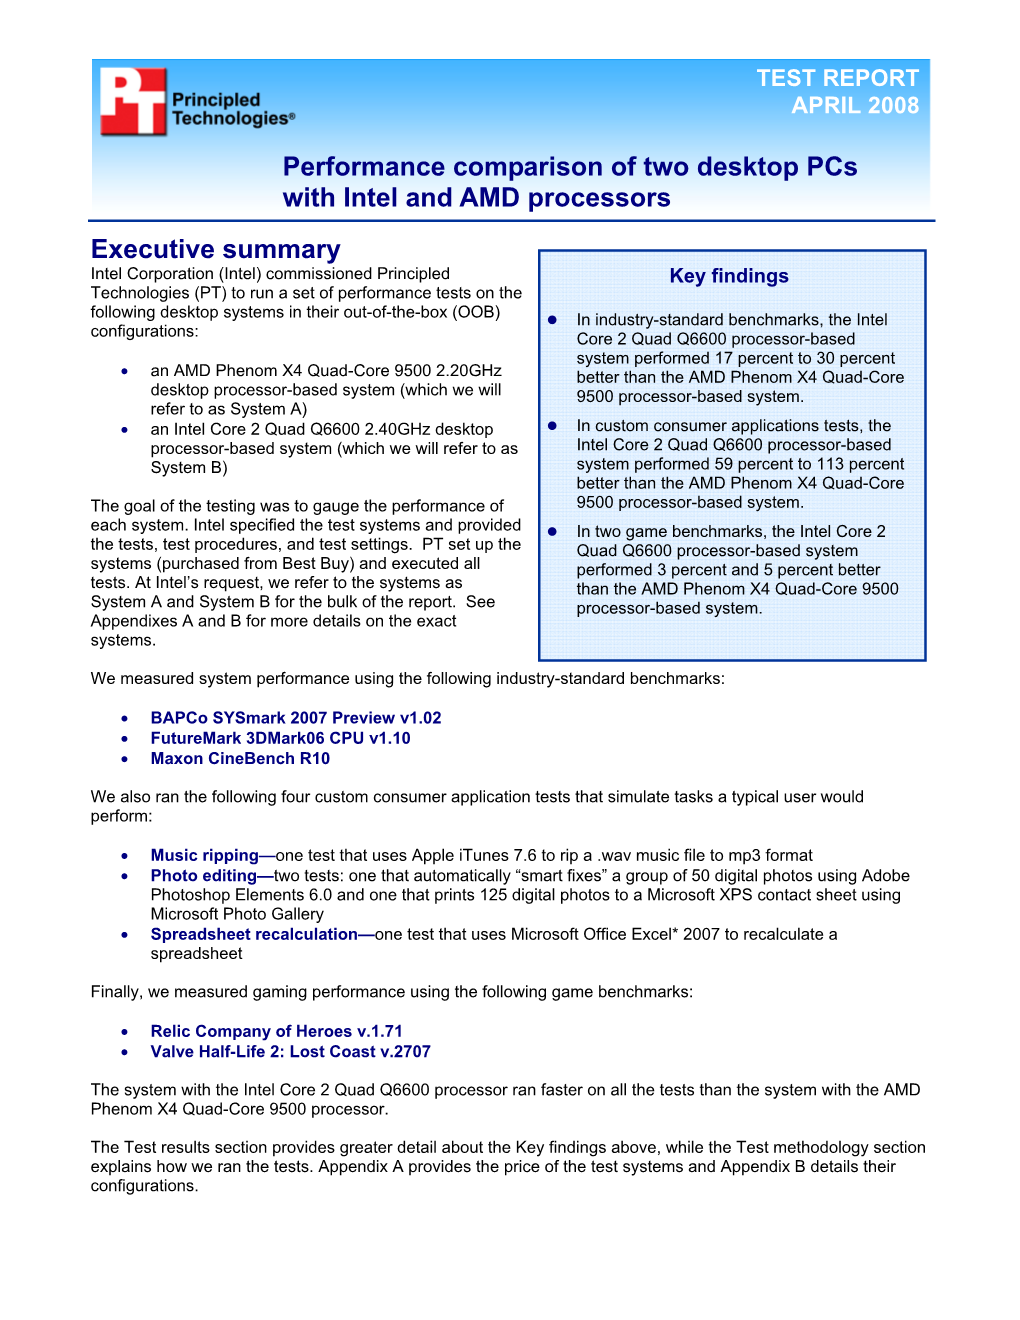 Performance Comparison of Two Desktop Pcs with Intel and AMD Processors Executive Summary